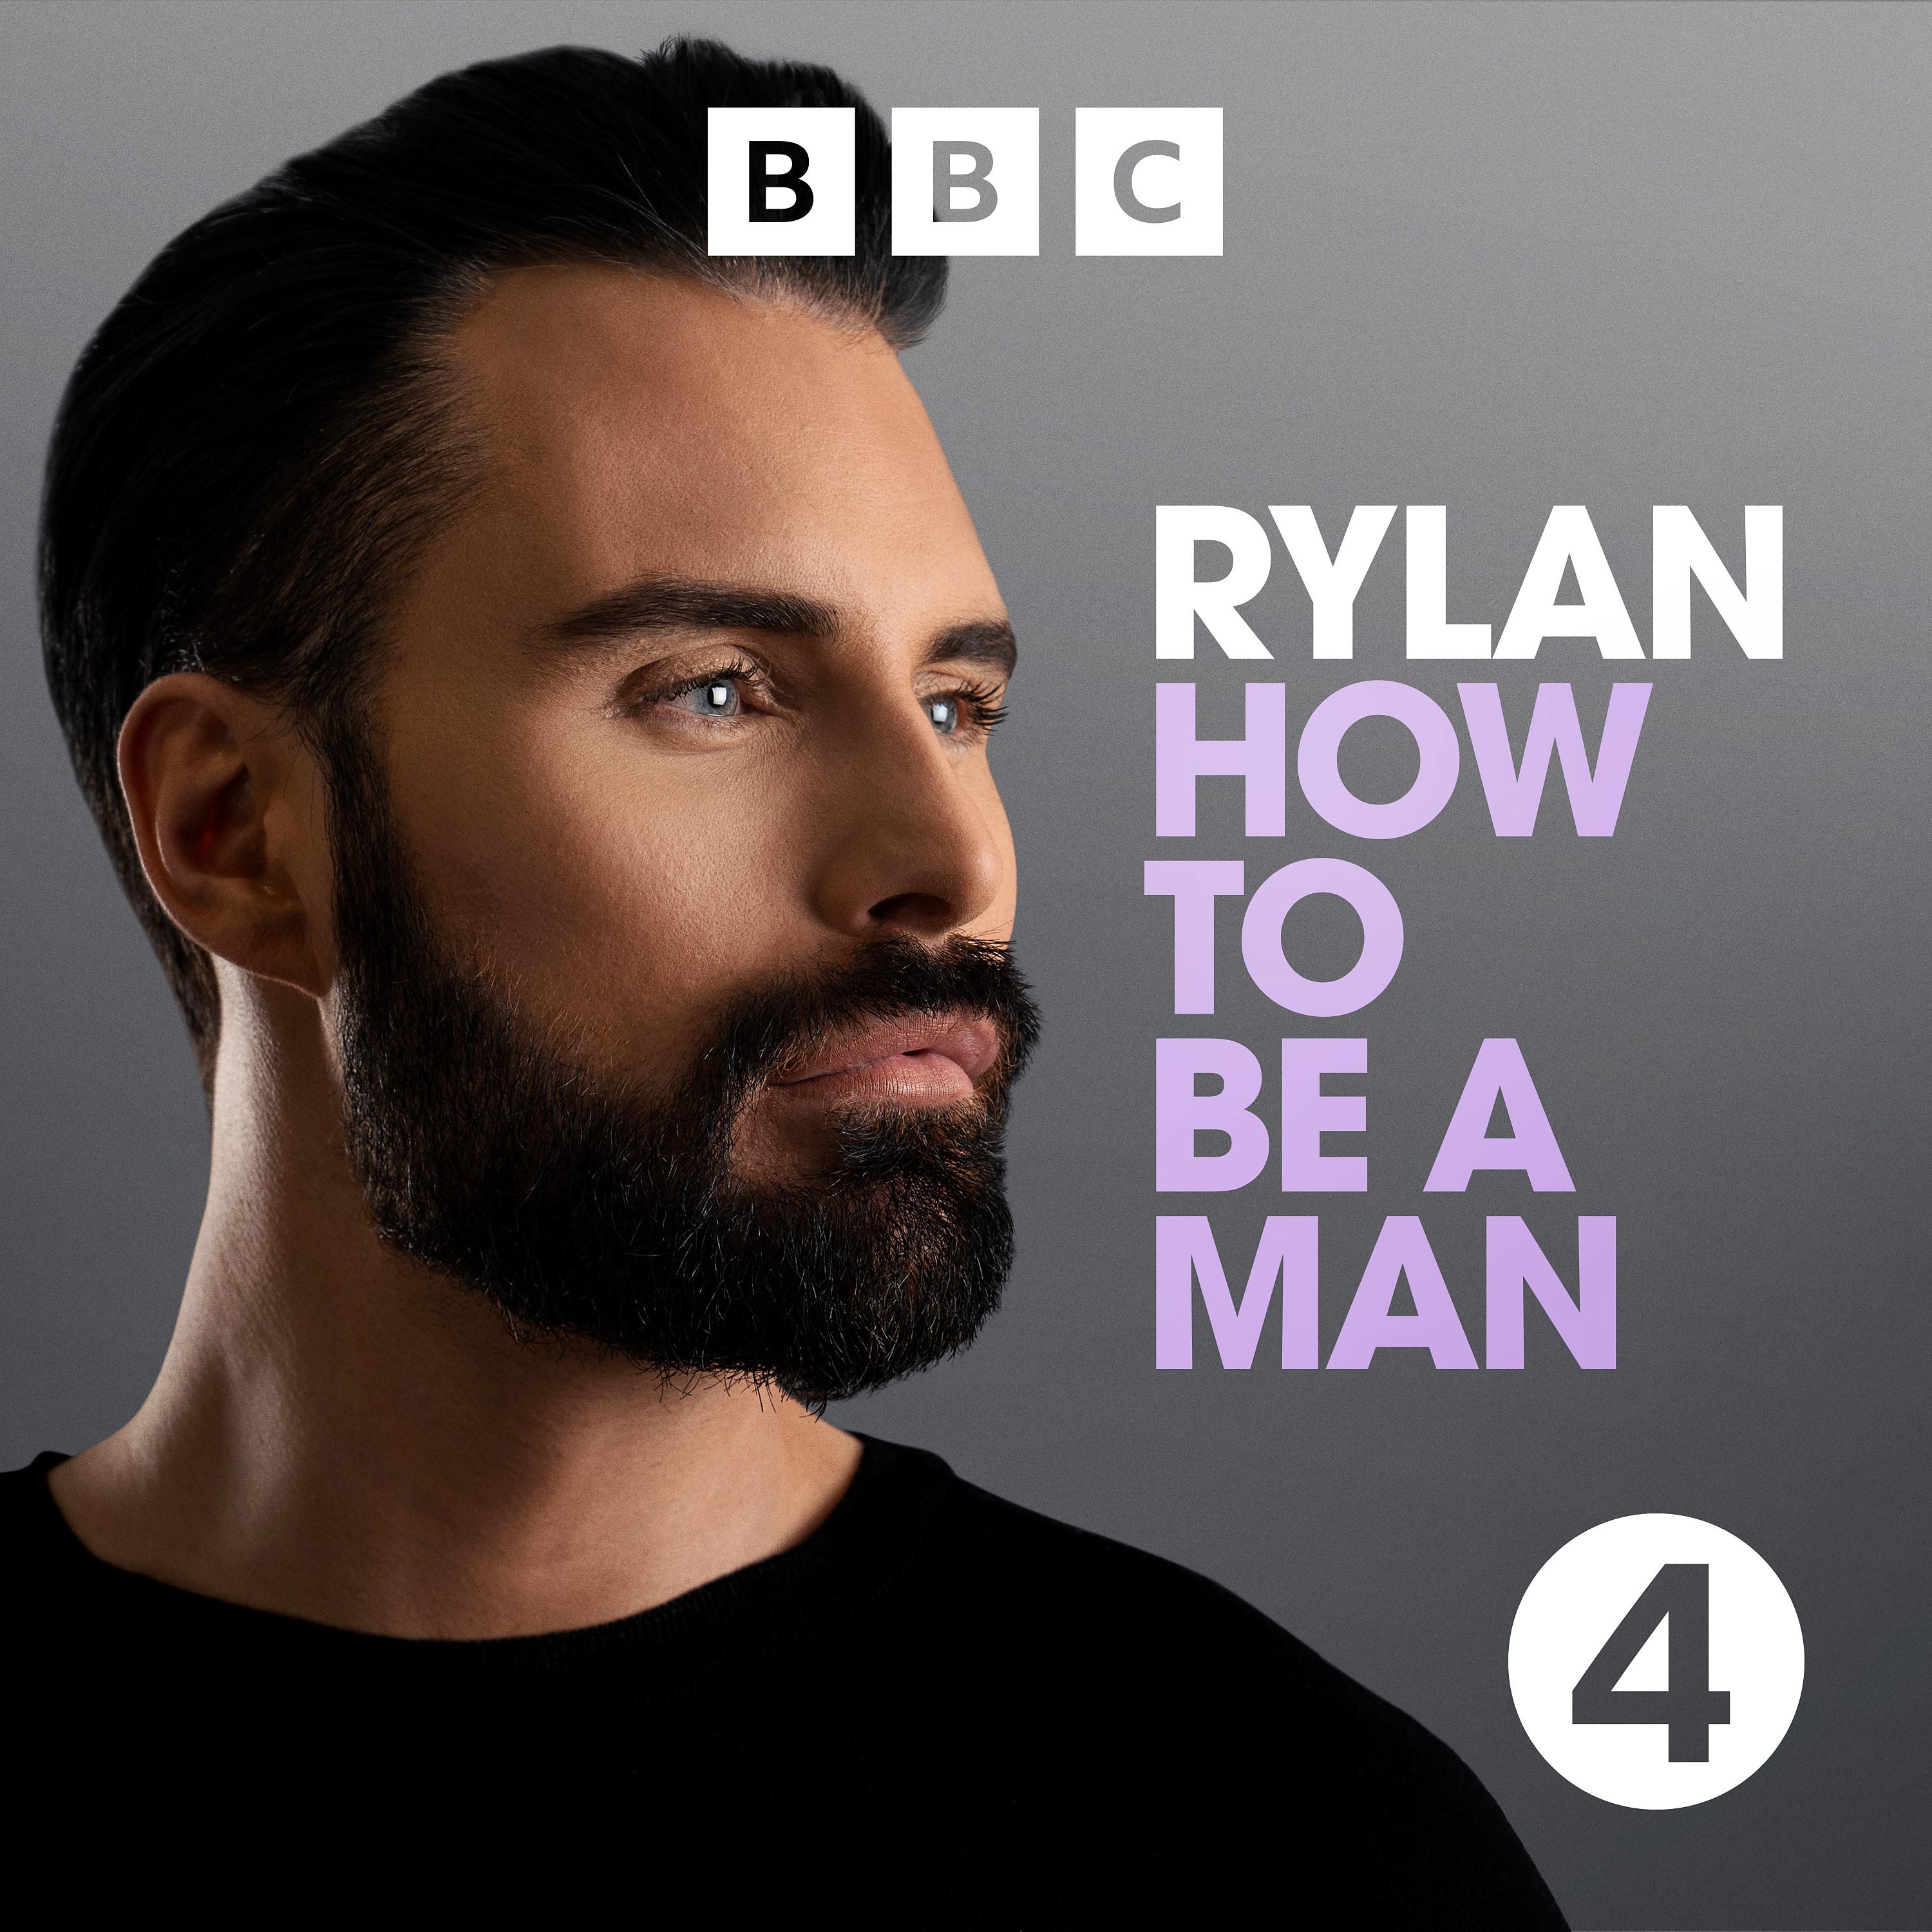 Welcome to Rylan: How to Be a Man